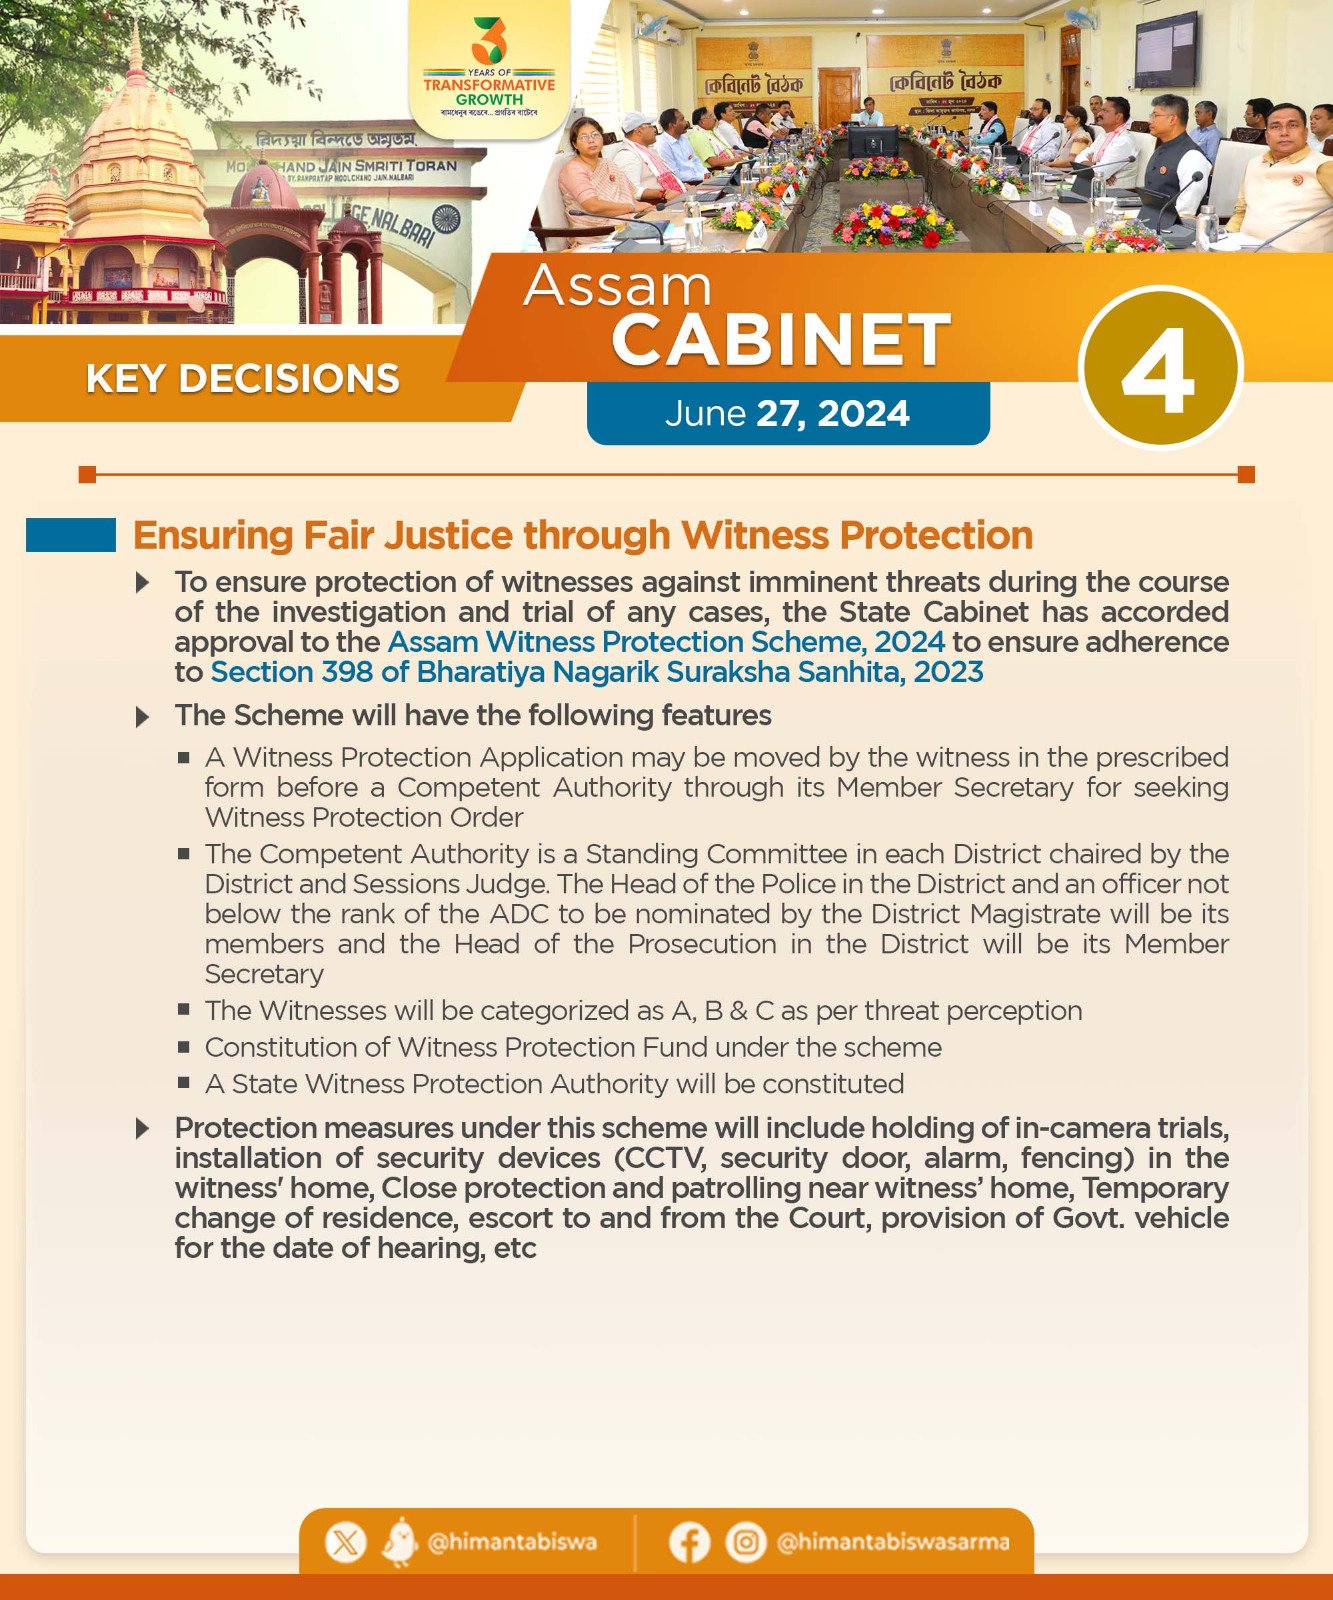 Cabinet Decision on 27th June, 2024 (4)